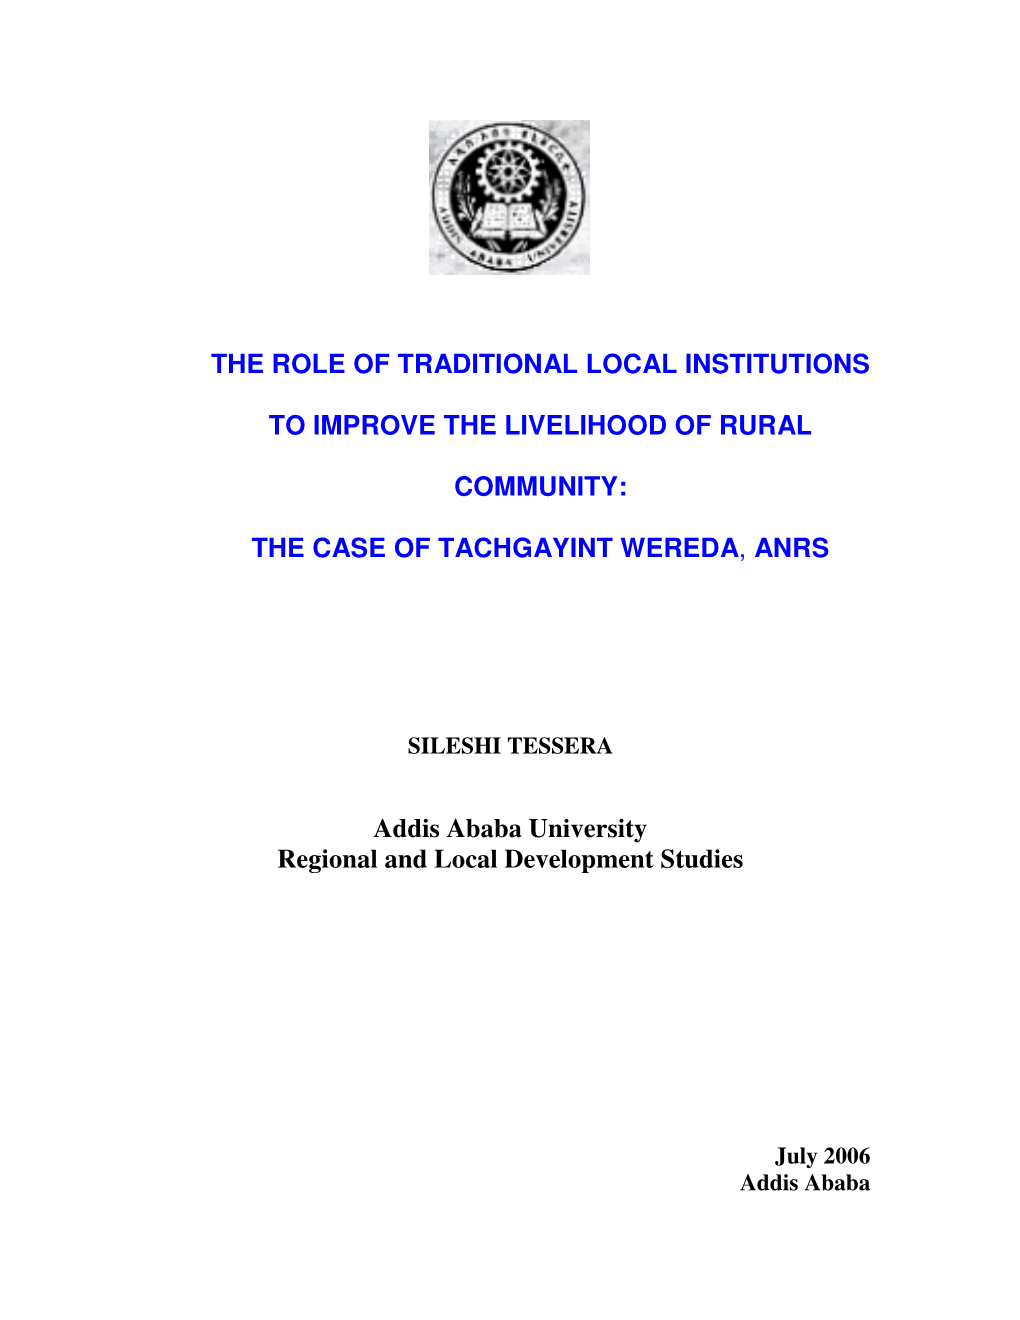 The Role of Traditional Local Institutions to Improve the Livelihood of Rural